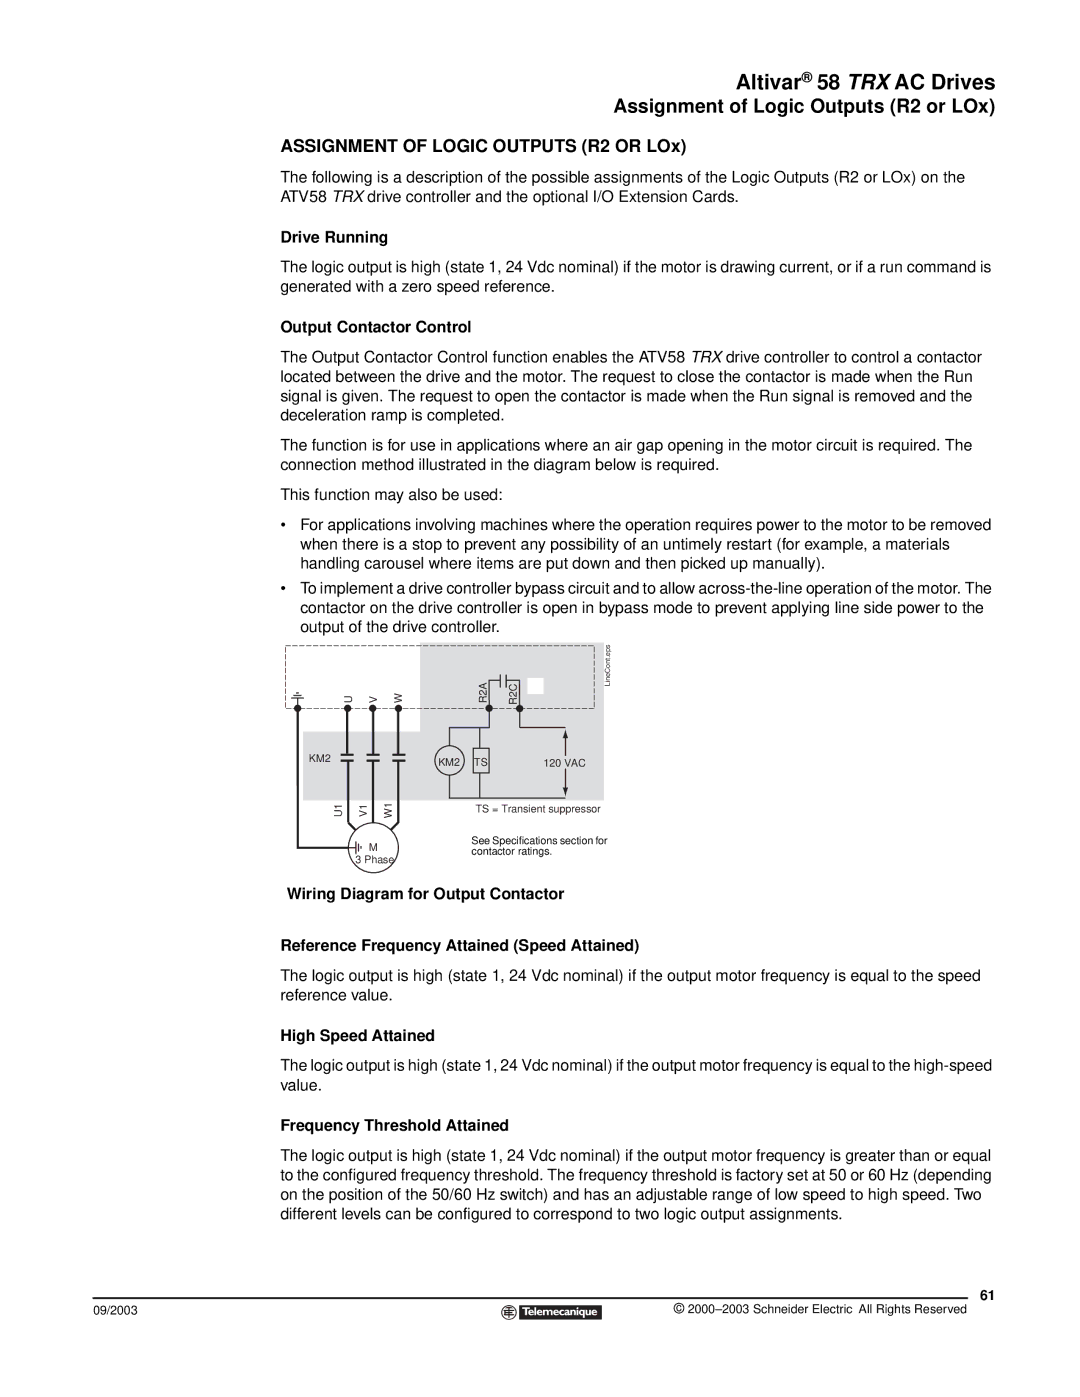 Schneider Electric 58 TRX manual Assignment of Logic Outputs R2 or LOx, Drive Running, Output Contactor Control 